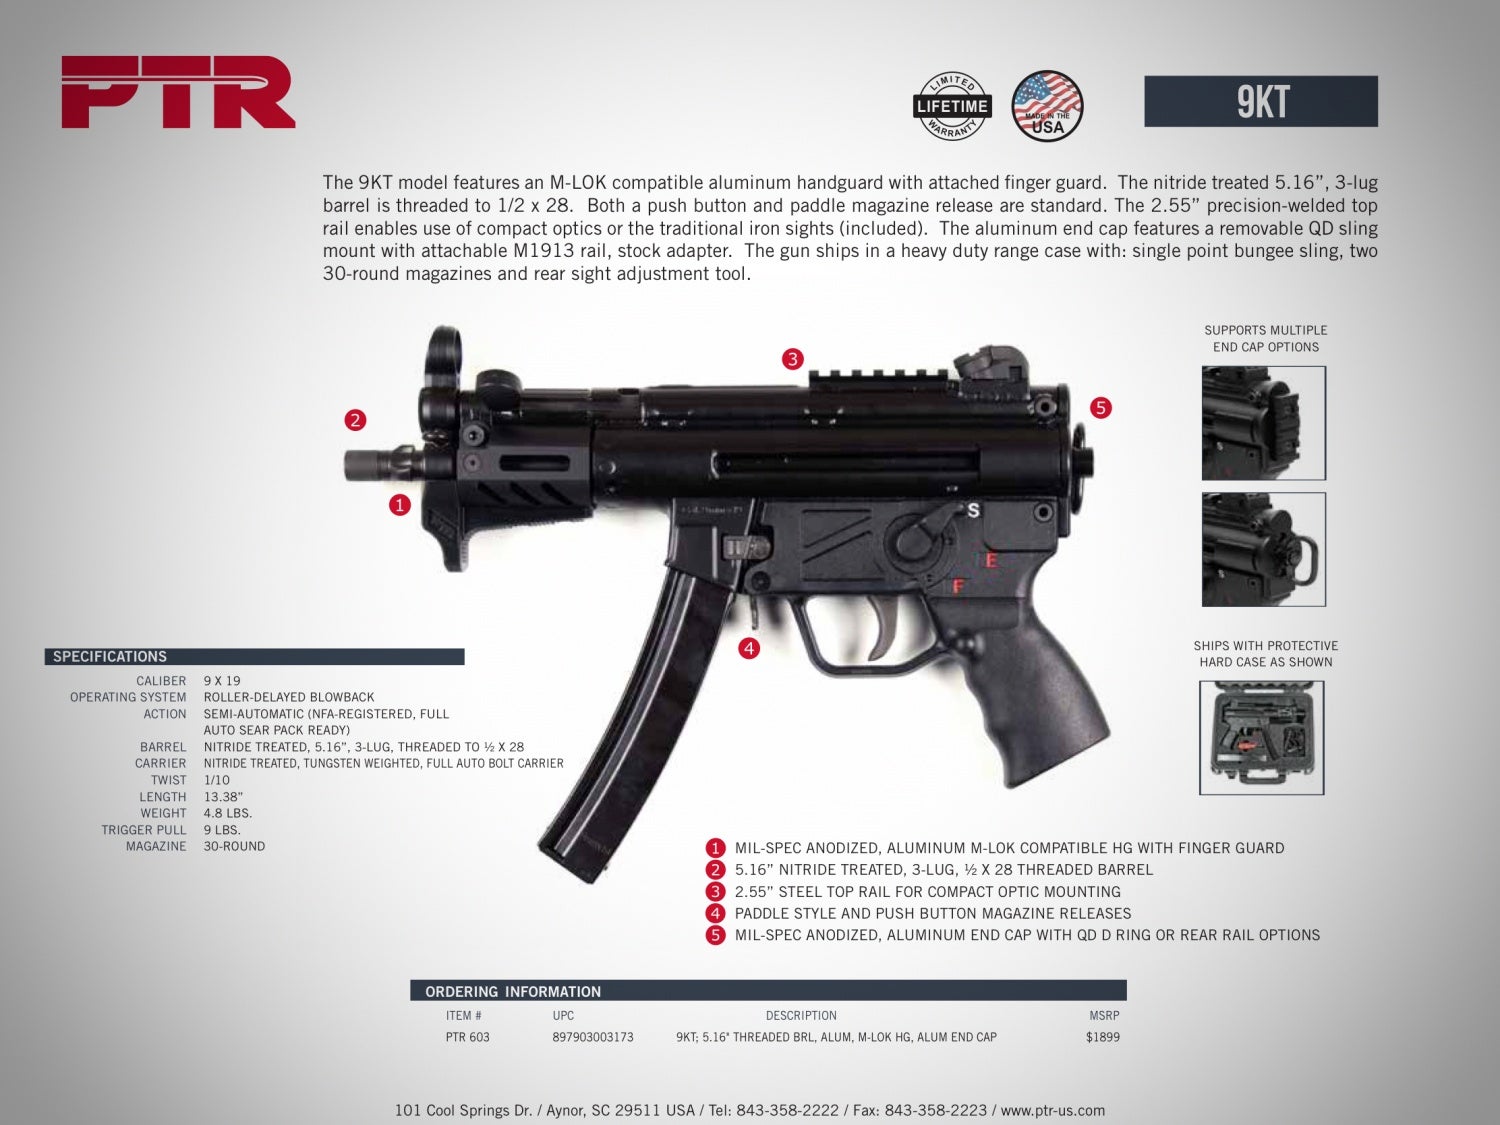 PTR GOES BIG (And Small): New 9KT And 9R MP5 Style Guns.